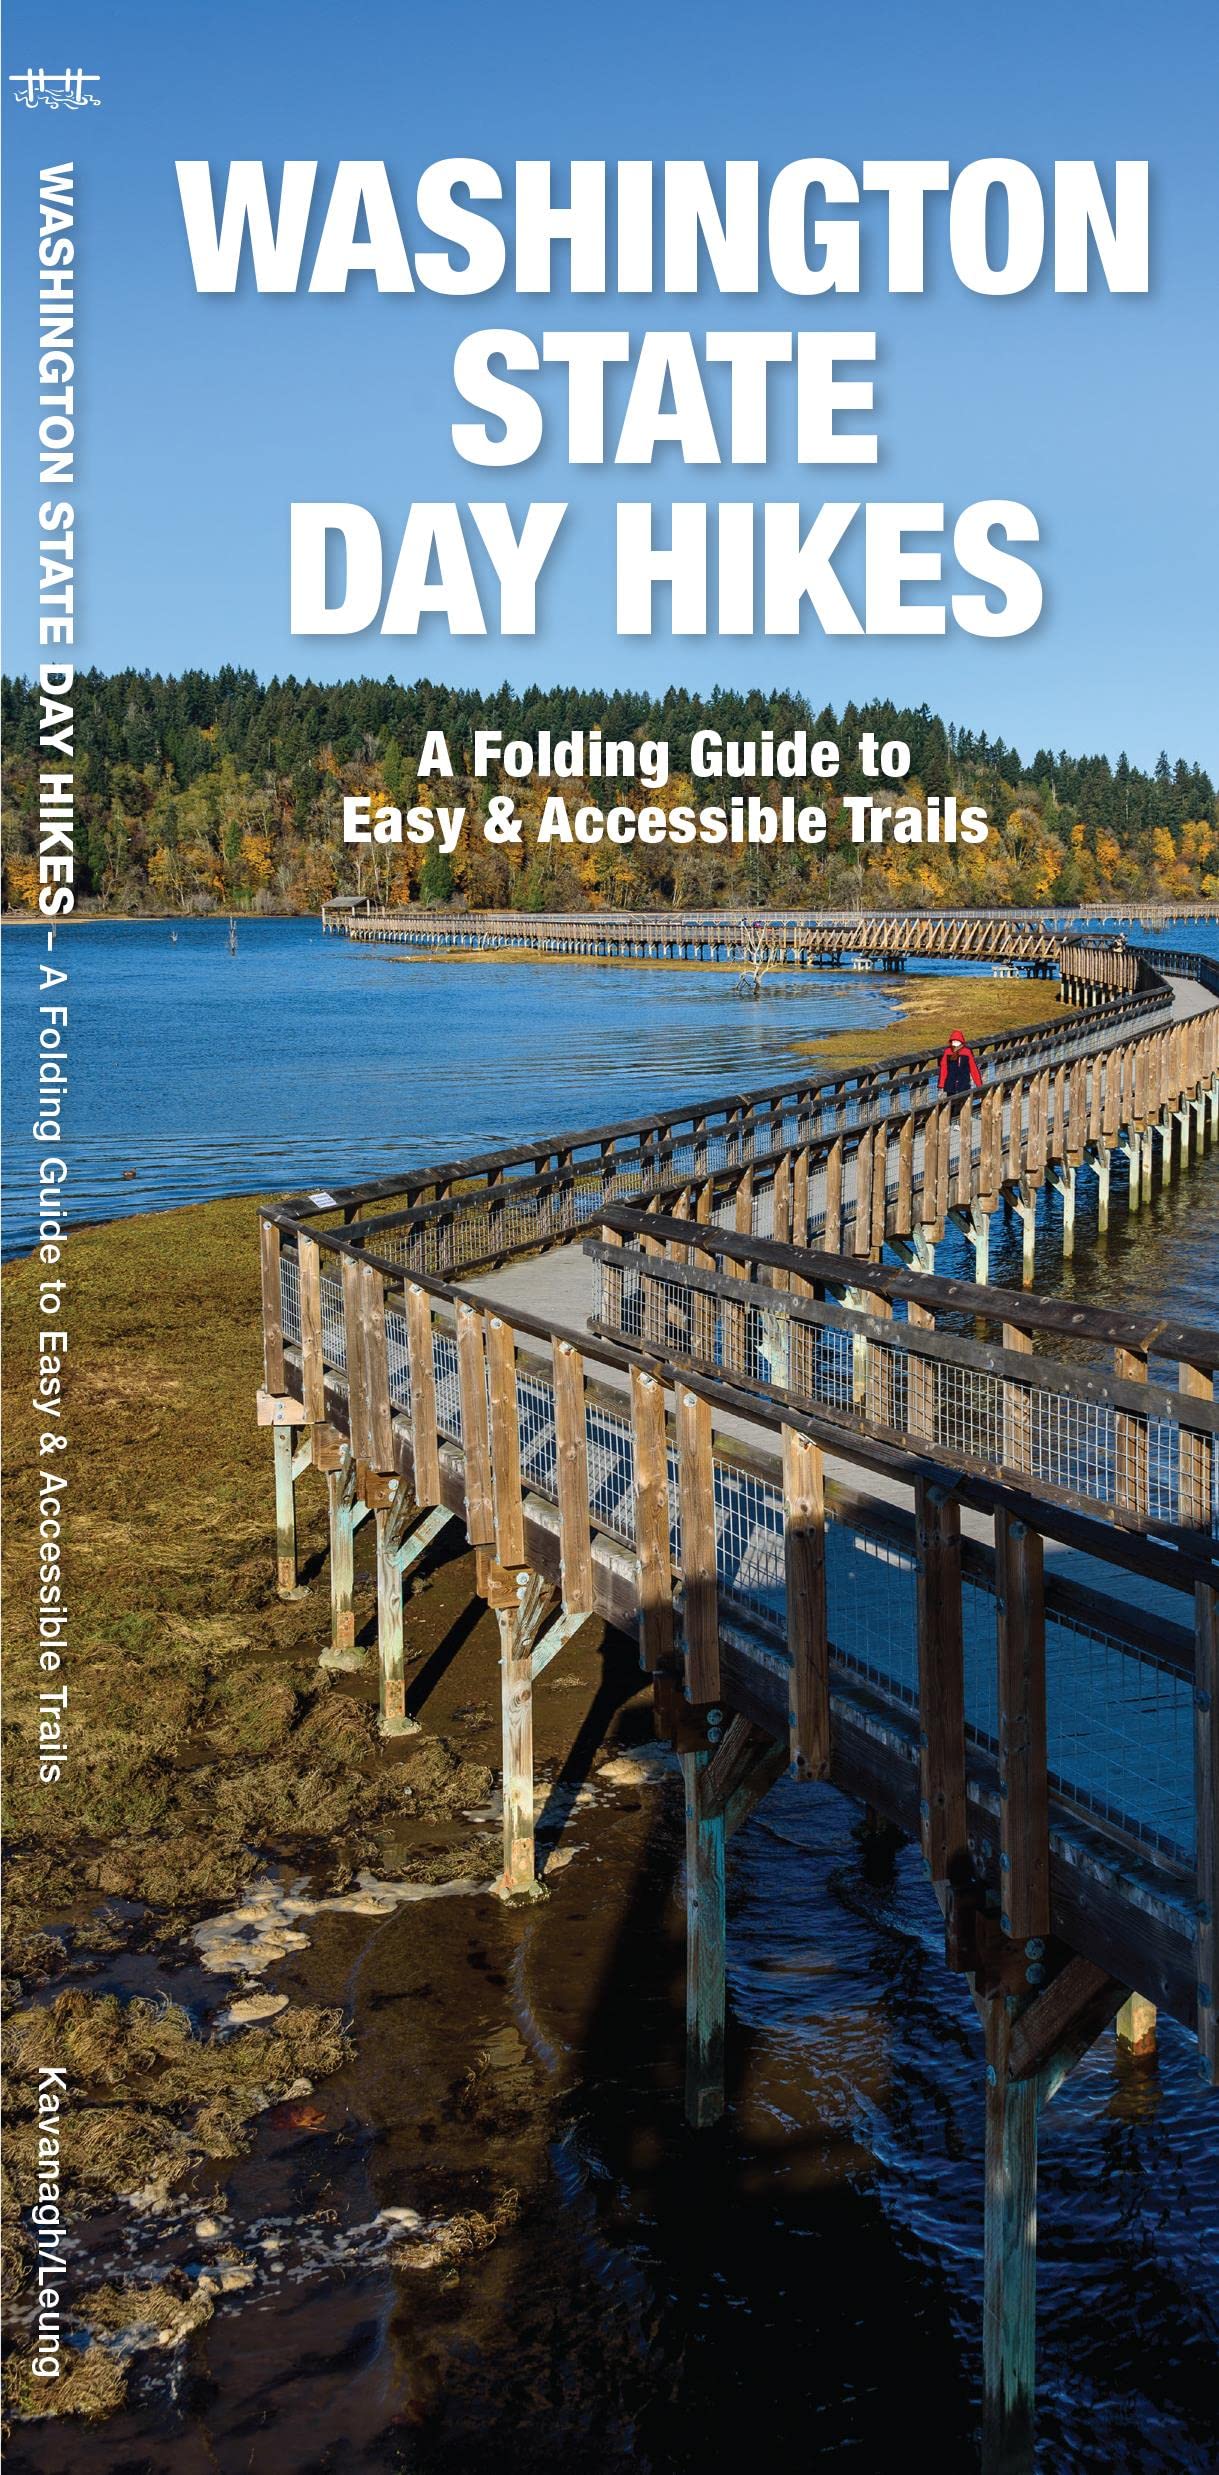 Washington State Day Hikes: A Folding Guide to Easy & Accessible Trails (Waterford Explorer Guide)